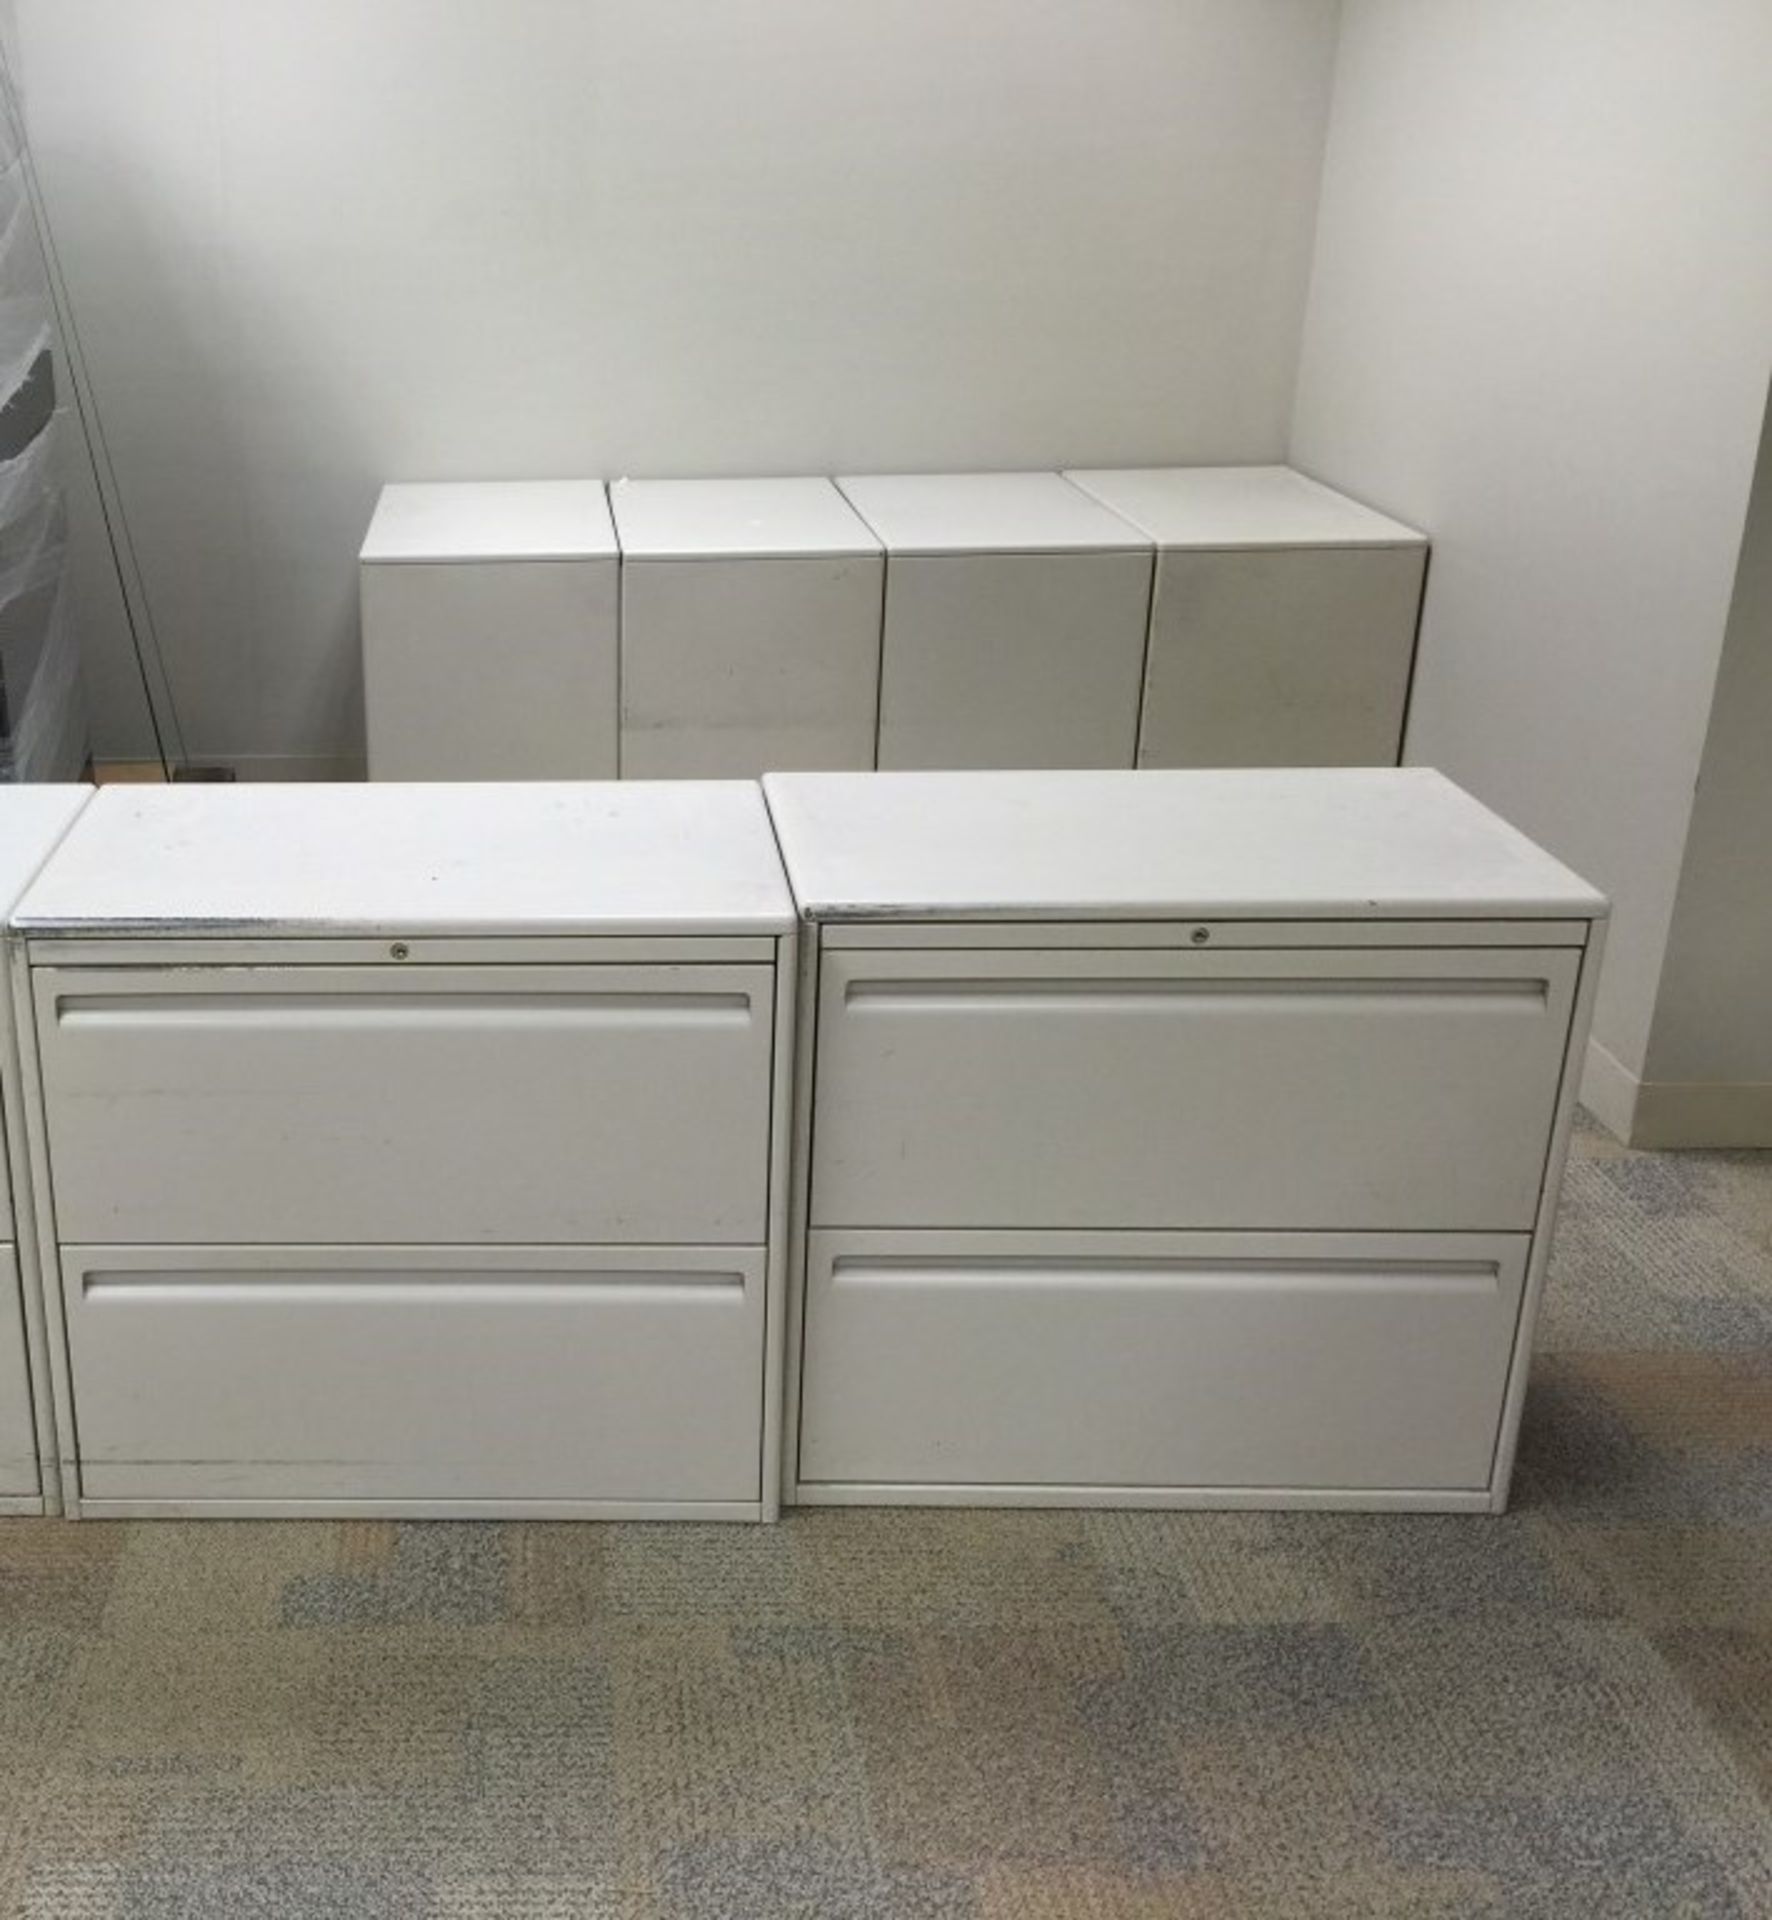 2 DRAWER LATERAL FILE CABINET, 3 PCS TIMES MONEY